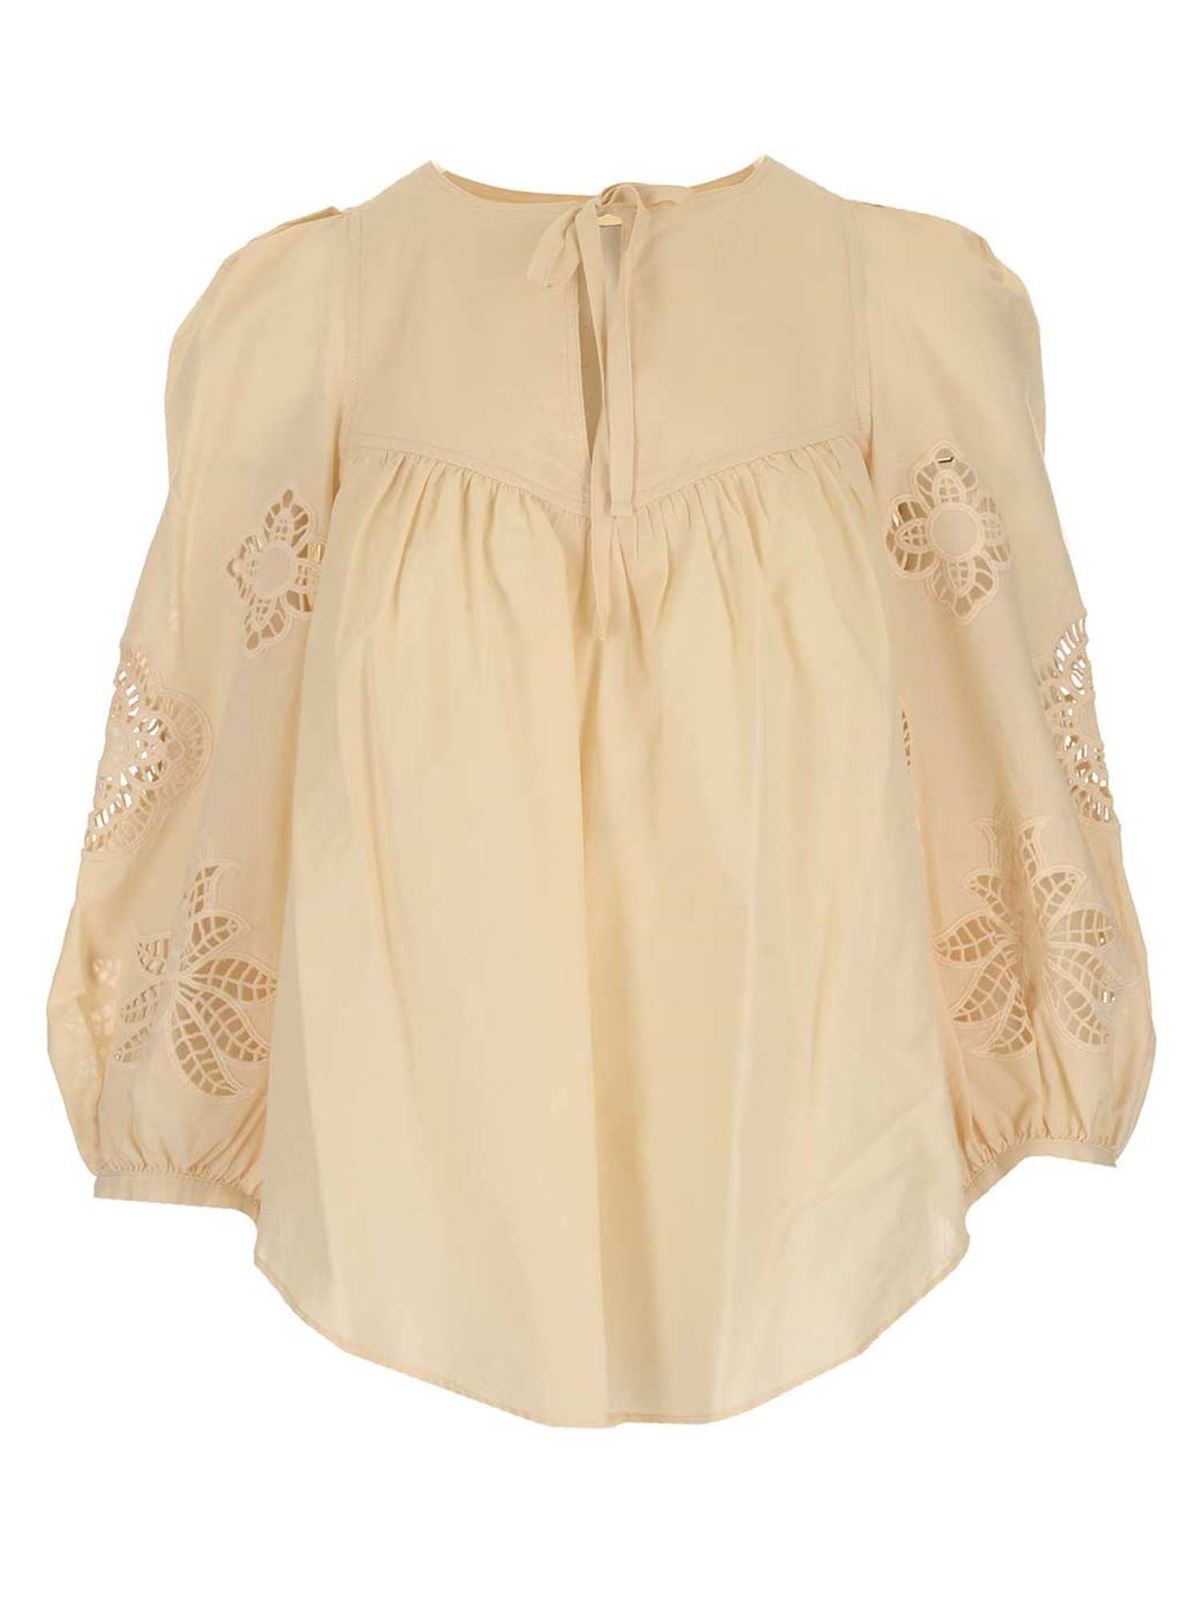 See by Chloé - Guipure blouse in Macadamia Brown color - blouses ...